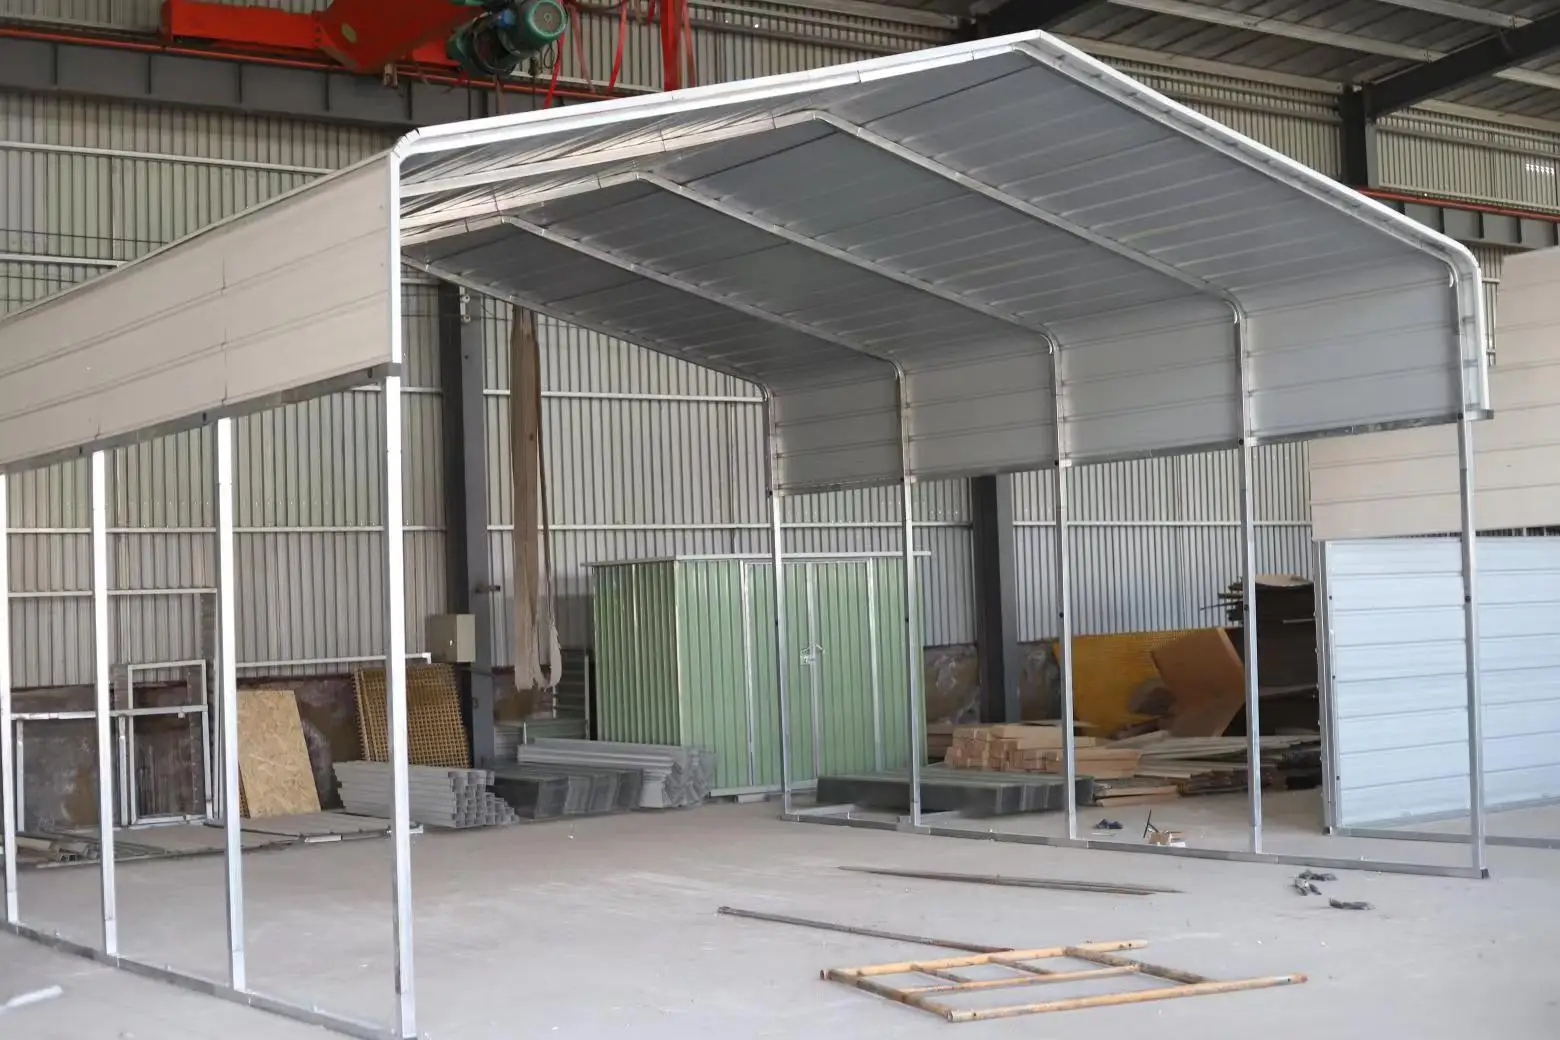 Hot Sale Used Metal Carports Sale Car Parking Shed Carport With Regular Roof Buy High Quality Metal Carports Carports Car Packing Shed Product On Alibaba Com